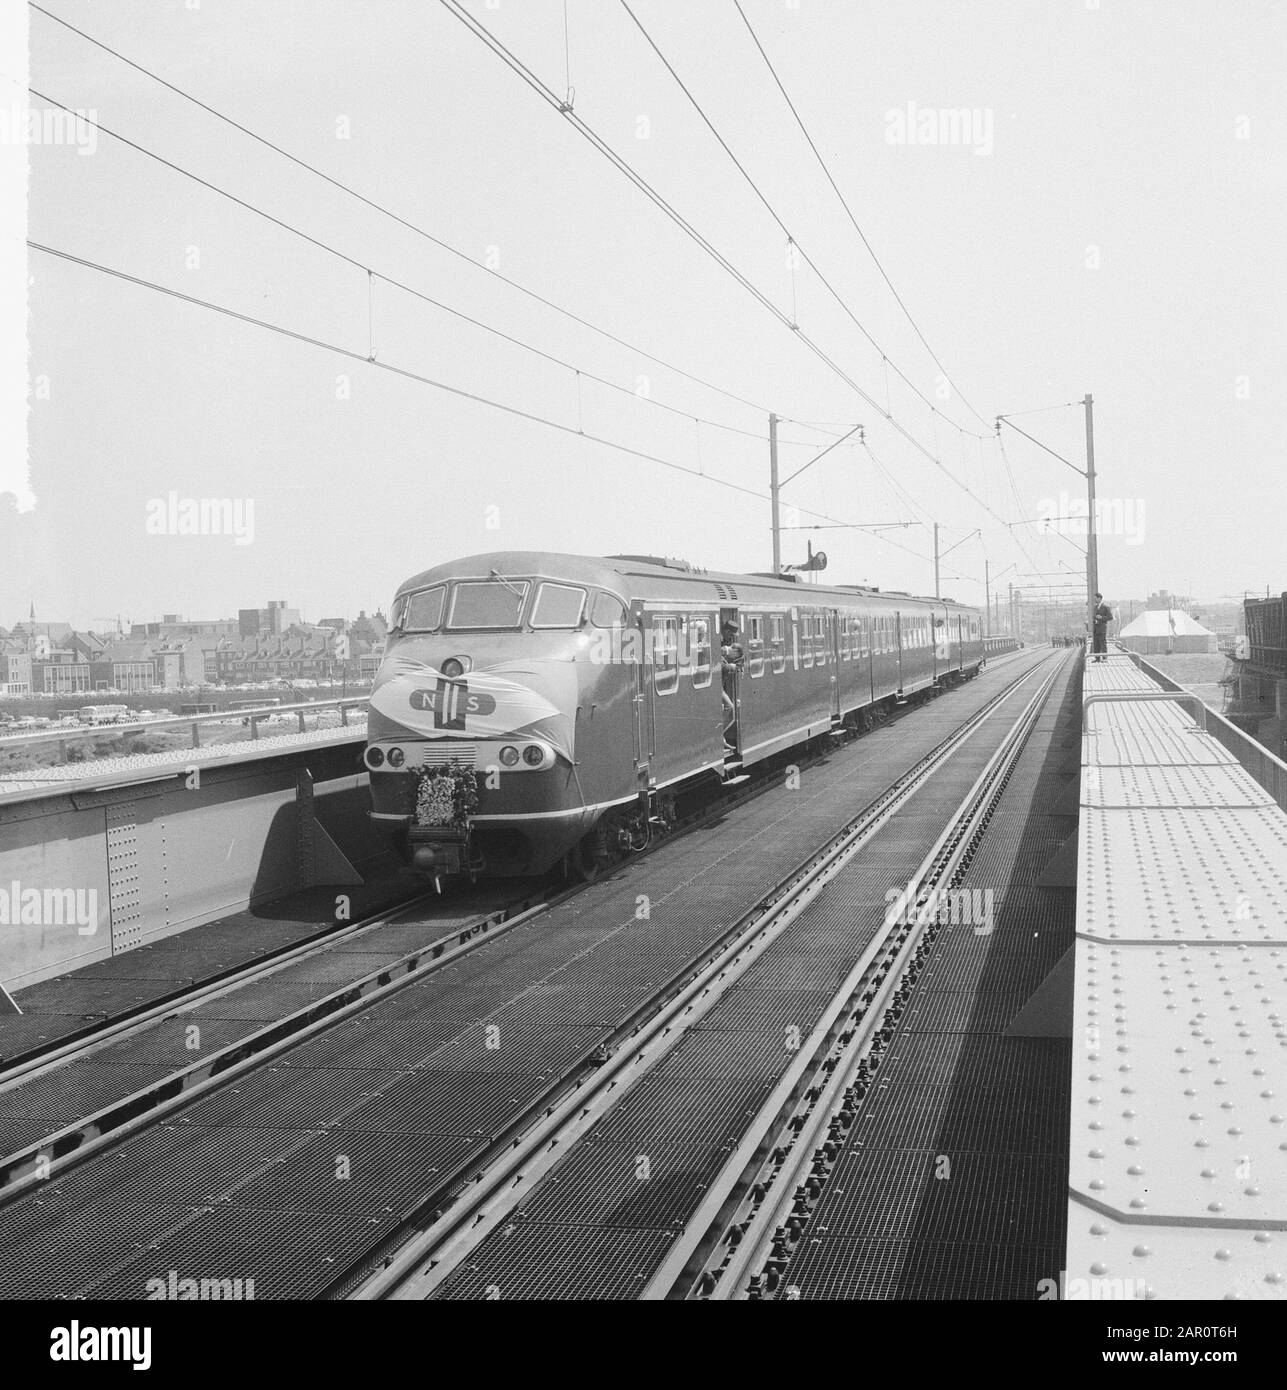 New railburg over the Meuse near Venlo put into operation a train with invited guests over the bridge Date: 23 May 1964 Location: Meuse, Venlo Keywords: invitees, railway bridges, trains Stock Photo